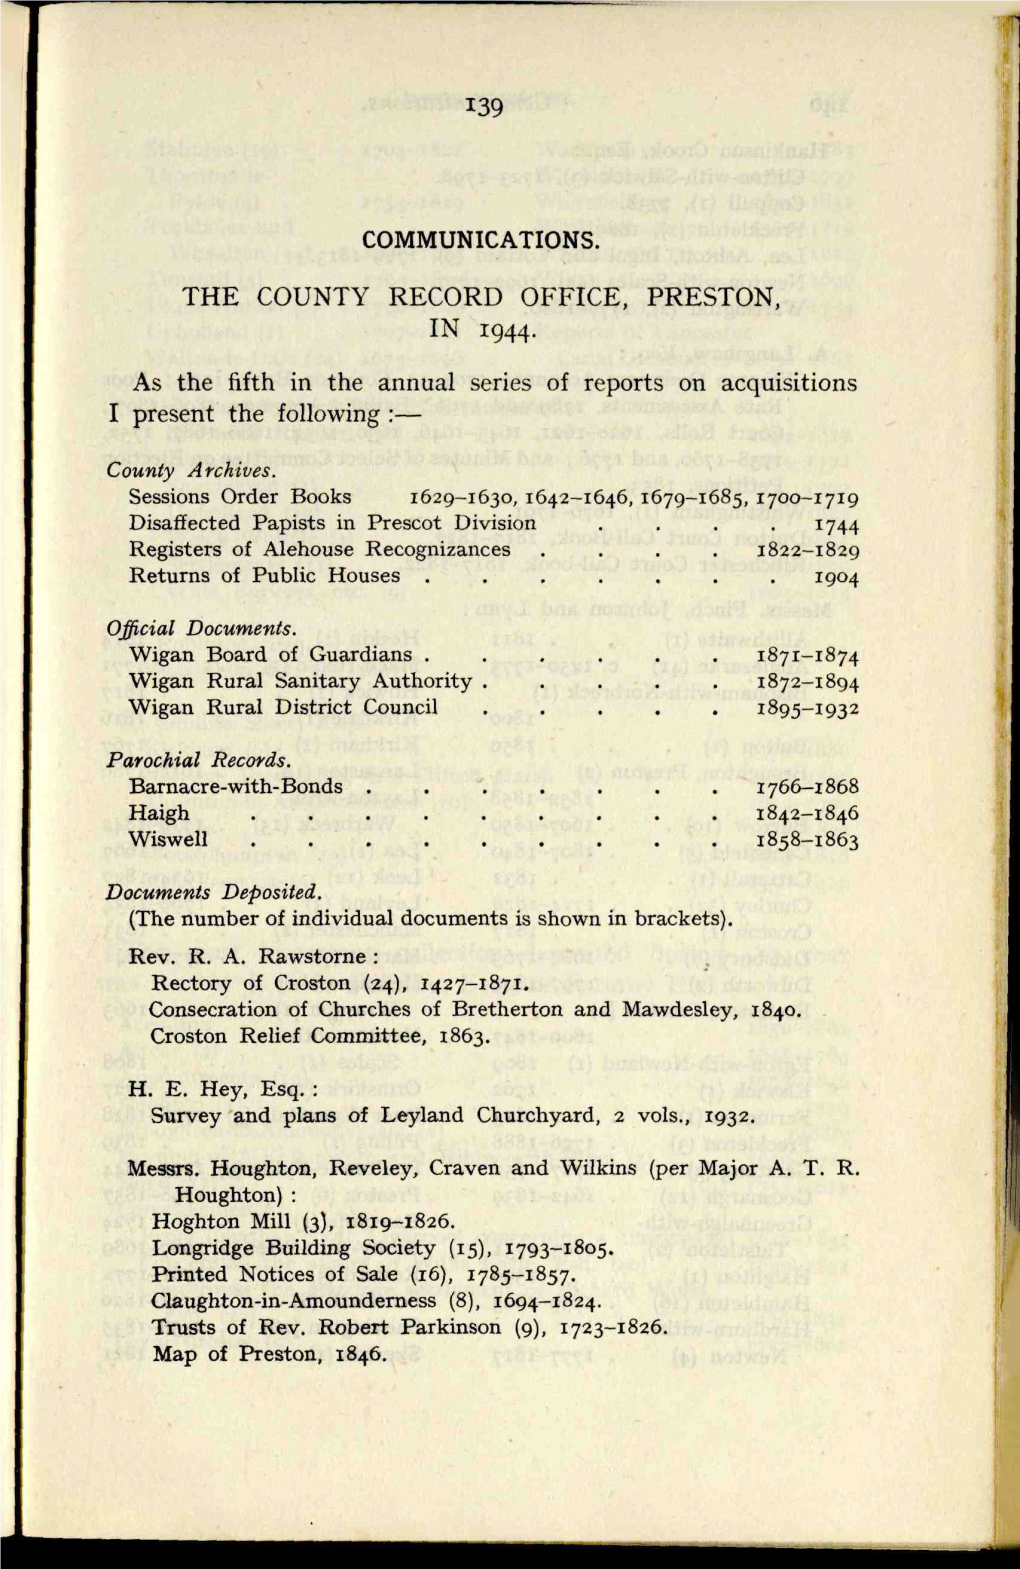 COMMUNICATIONS. the COUNTY RECORD OFFICE, PRESTON, in 1944. As the Fifth in the Annual Series of Reports on Acquisitions I Prese